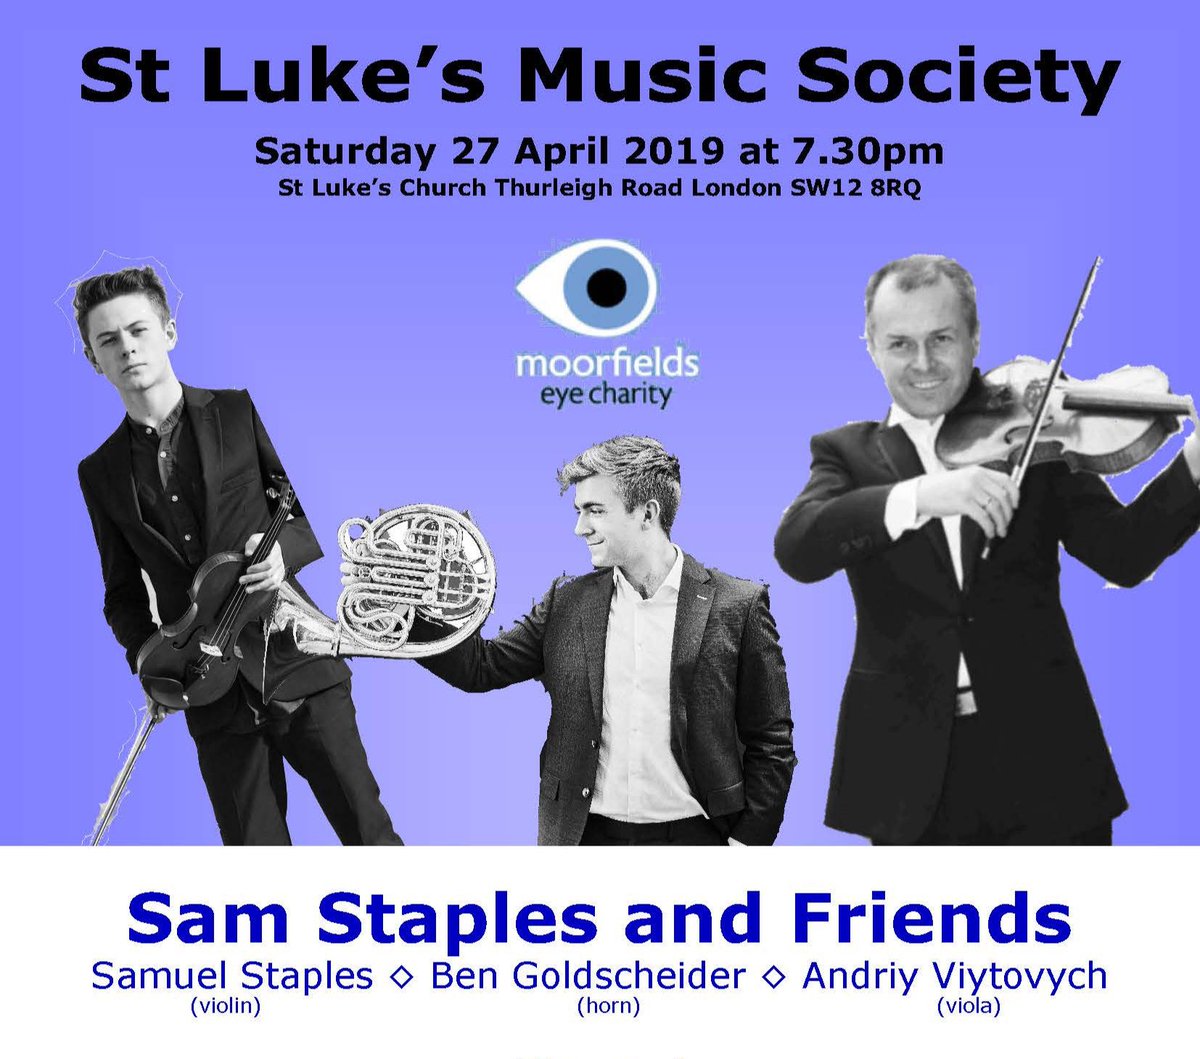 Best of luck to Sam Staples for his concert tomorrow night in the beautiful @StLukesSW12 church 🎻 Thanks to you and the St Luke's Music Society for supporting @EyeCharity - we'll be in the audience tomorrow! More details & tickets here: ow.ly/6A9950pRKLO